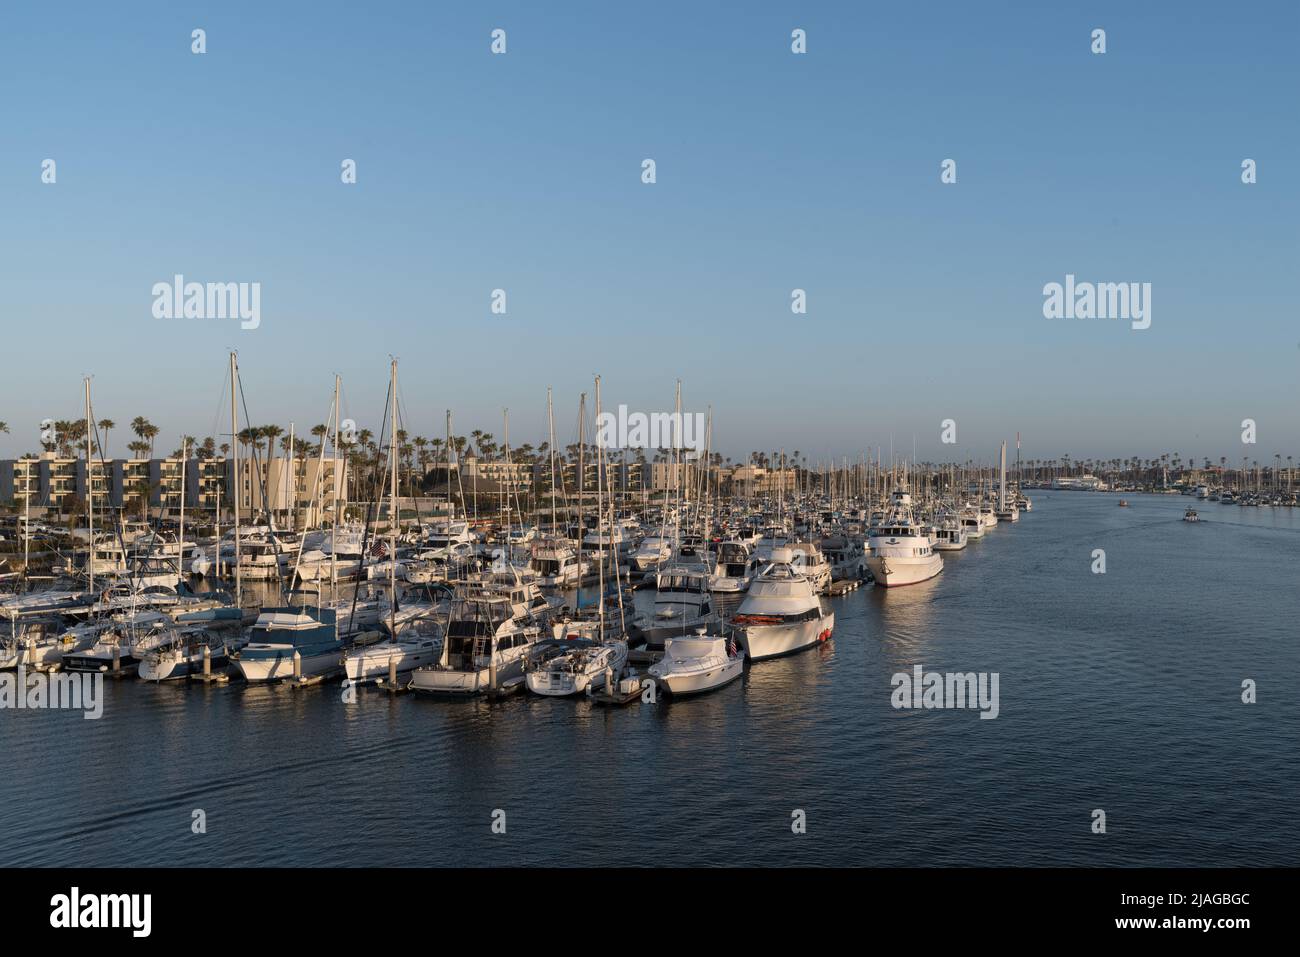 Channel Islands Harbor, California, USA - May 29, 2022: image  of a large group of docked boats shown durin a sunny afternoon. Stock Photo